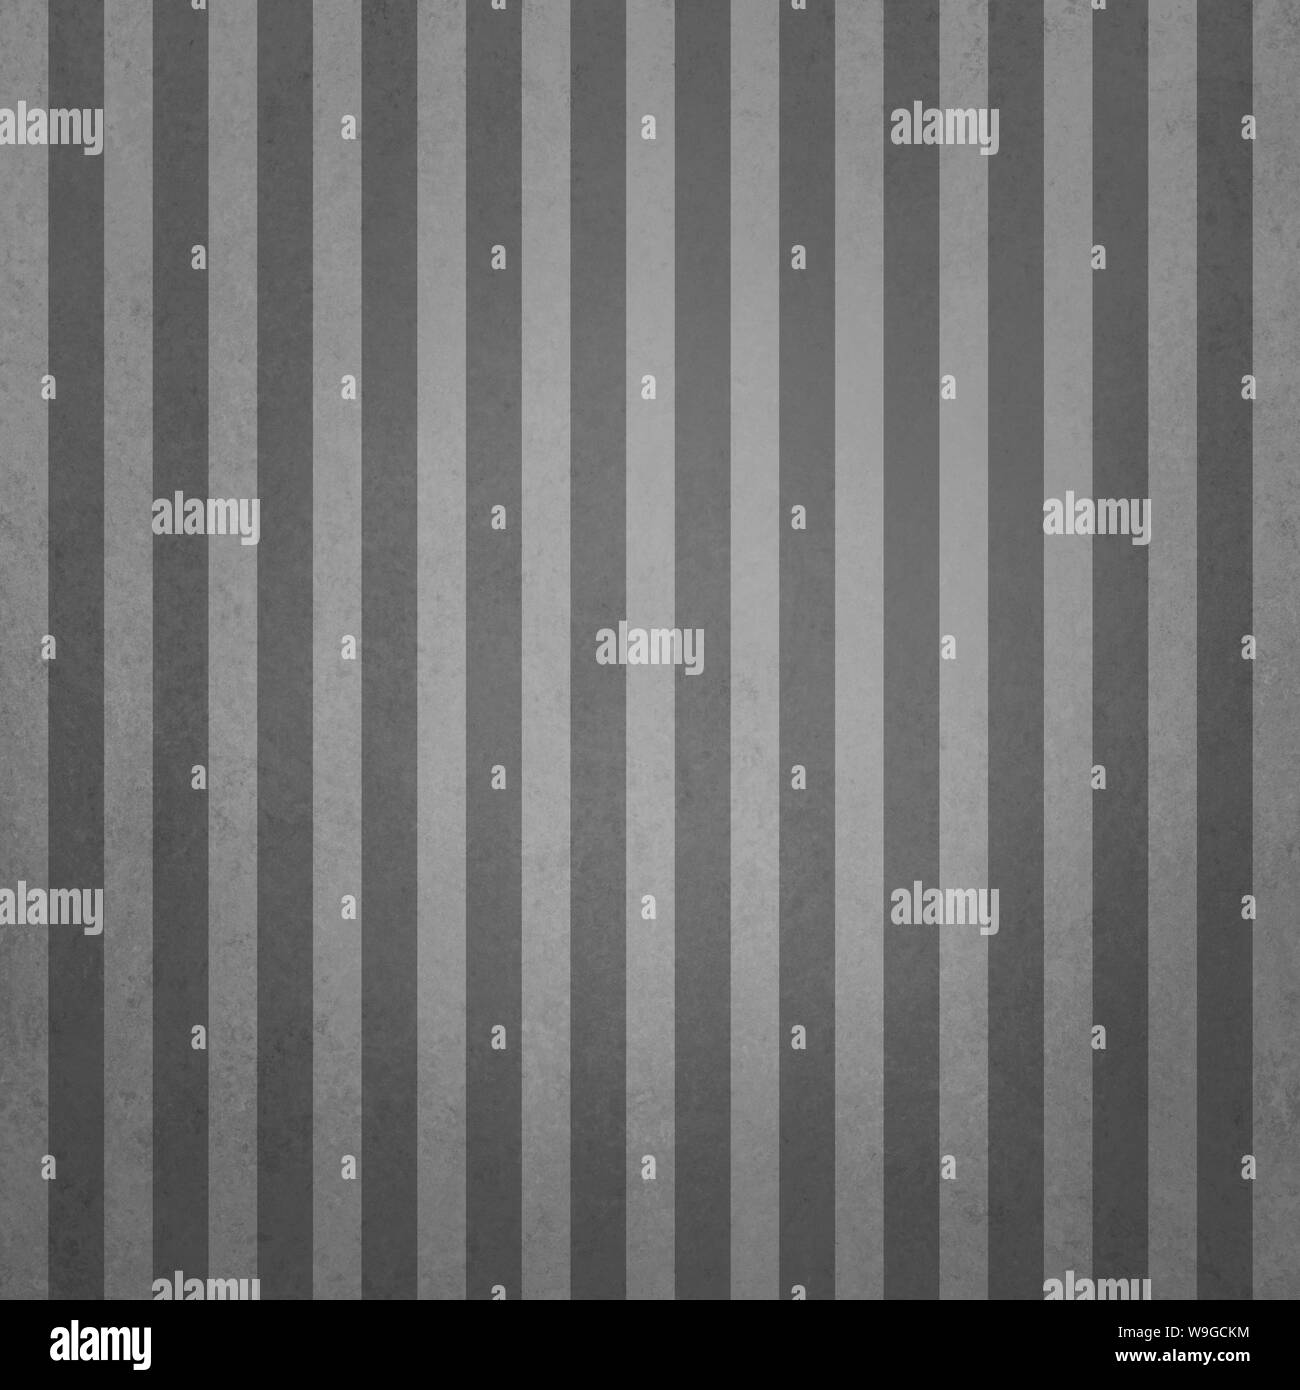 Elegant black and white striped background. Light and dark gray pin stripes in vertical lines in an old vintage textured design that is elegant. Backg Stock Photo